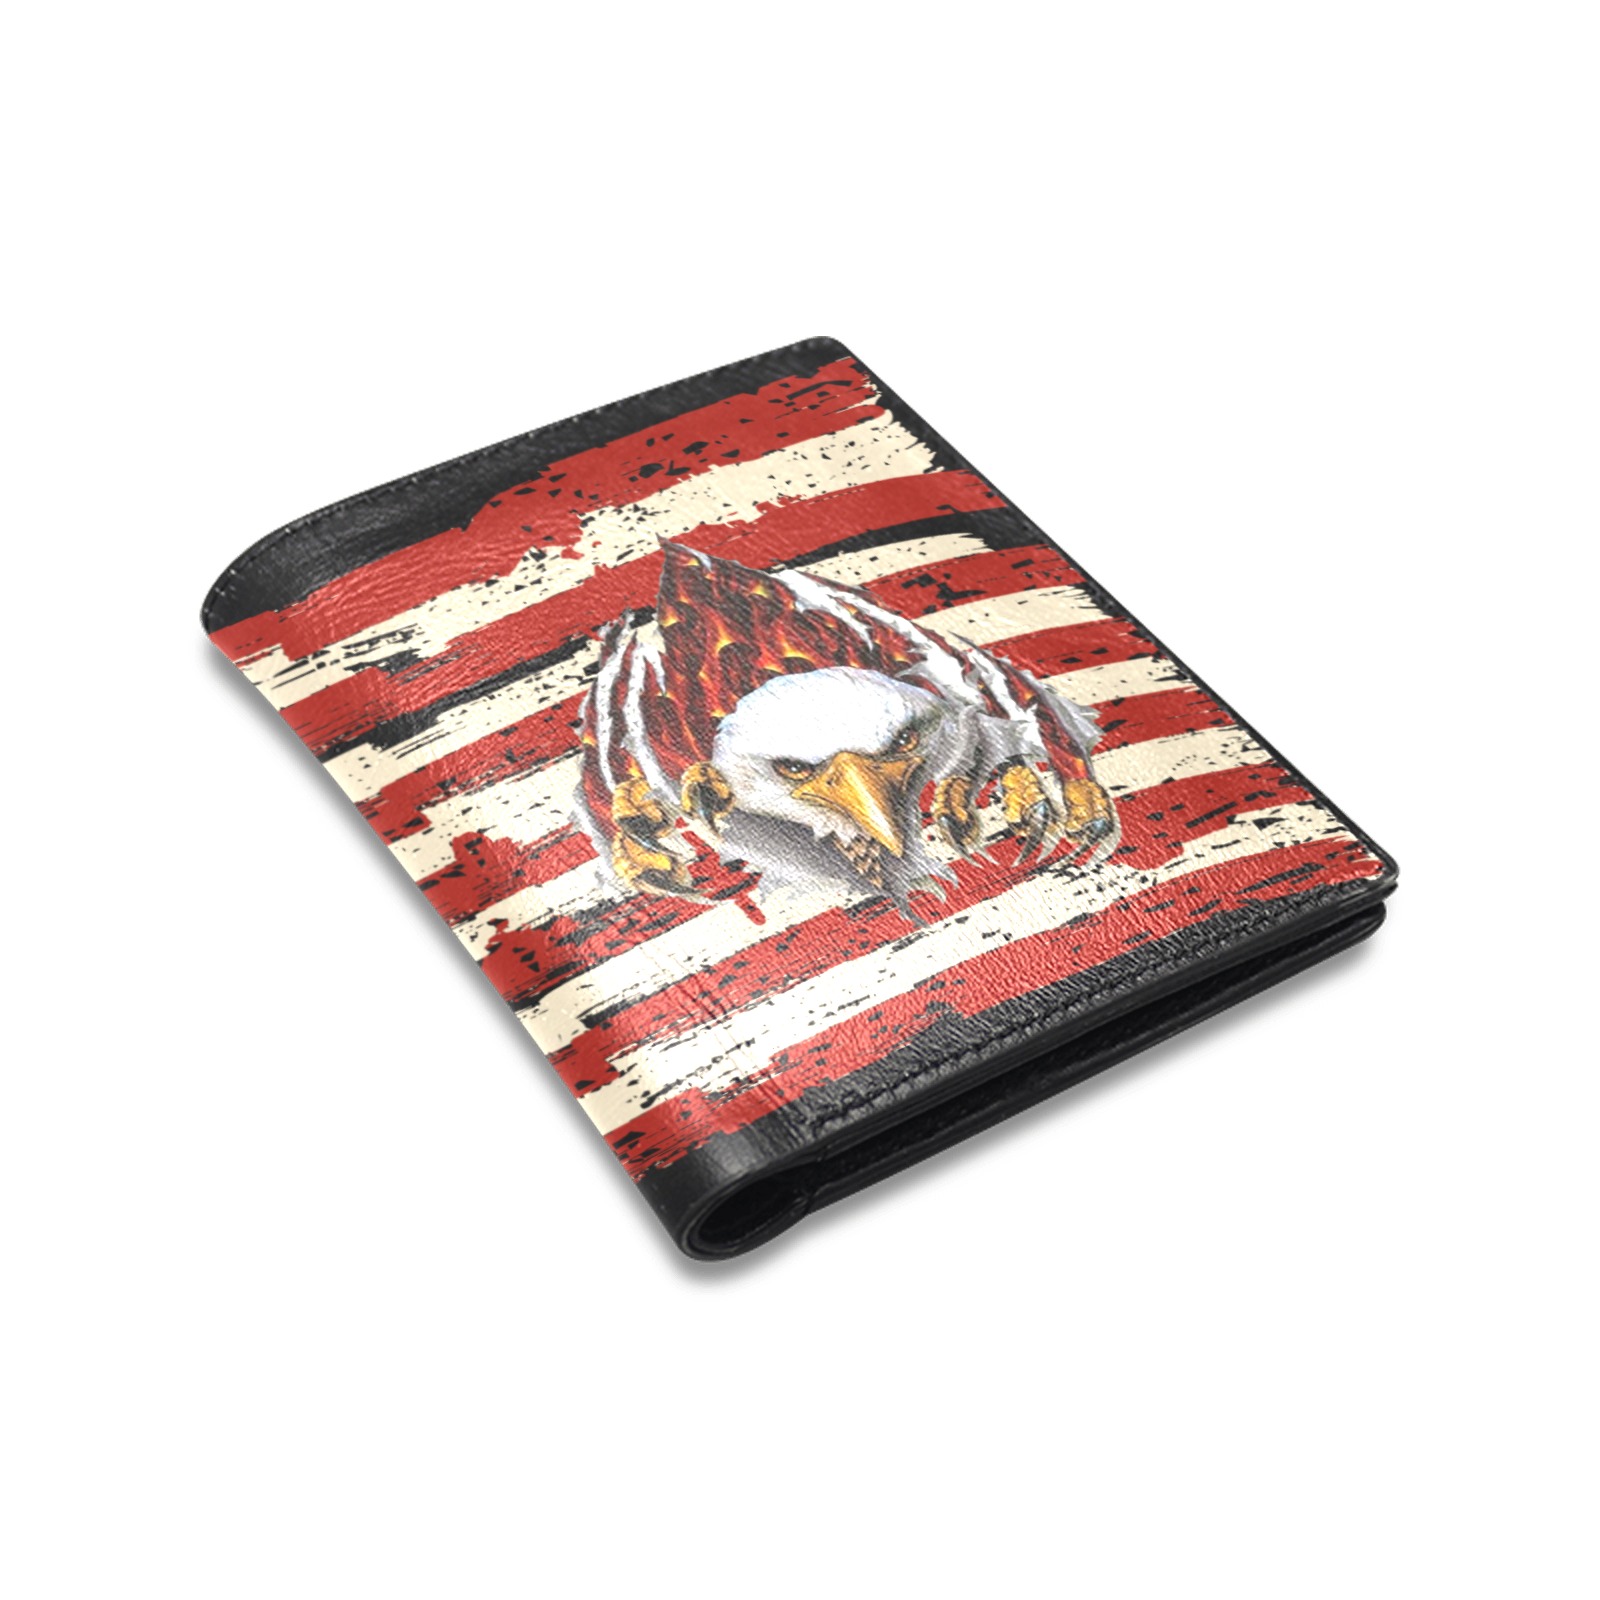 American Freedom Fighter Leather Wallet Men's Leather Wallet (Model 1612)